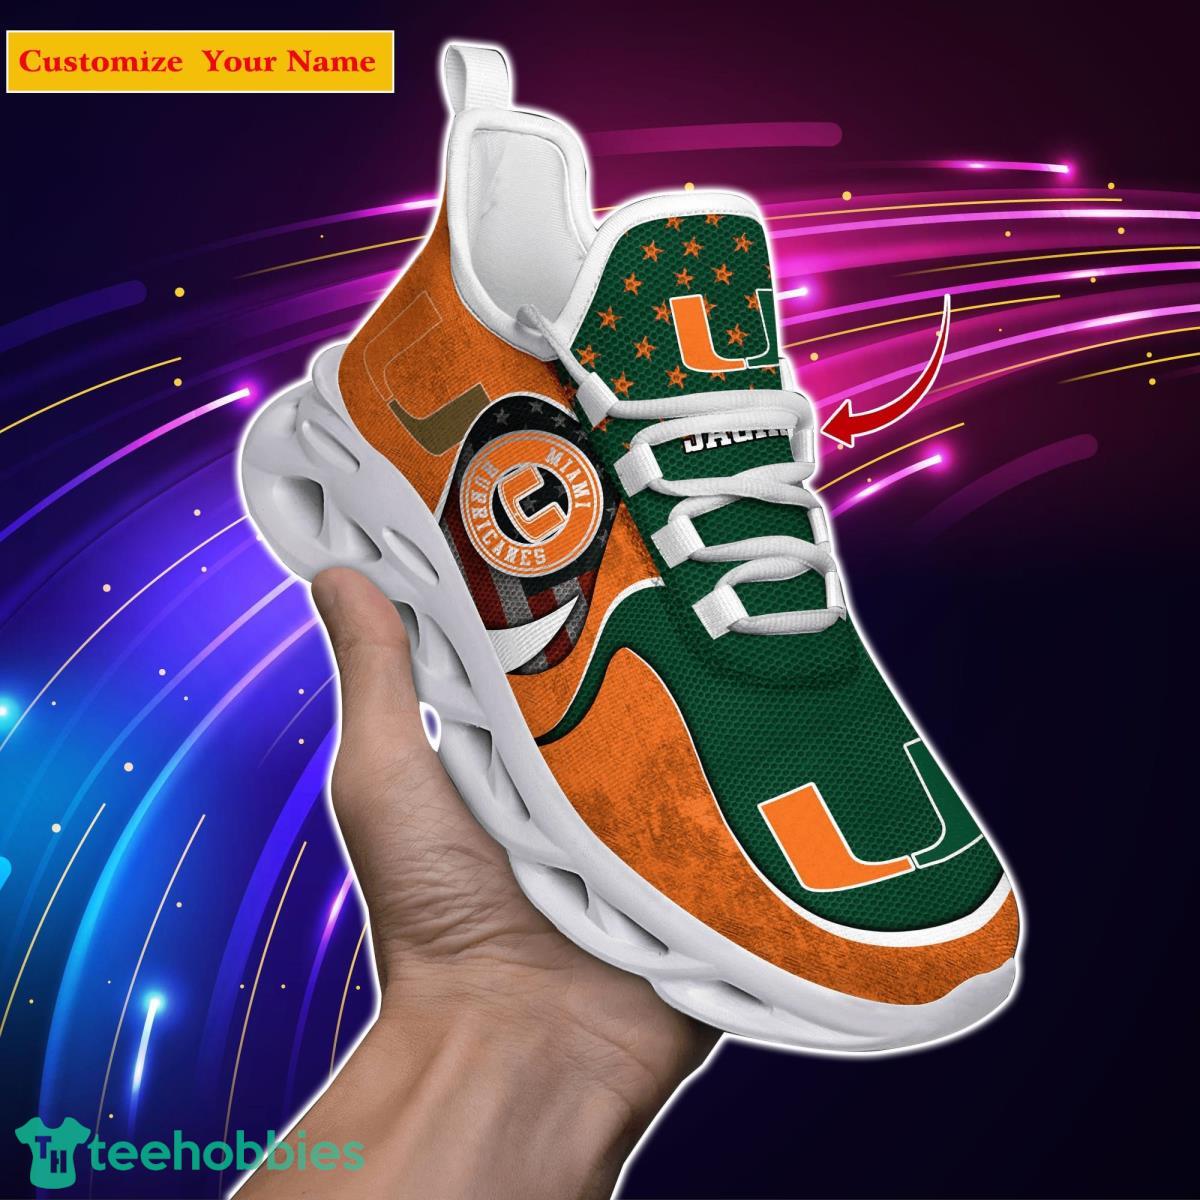 Miami Hurricanes NCAA1 Custom Name Max Soul Shoes Special Gift For Men Women Fans Product Photo 1